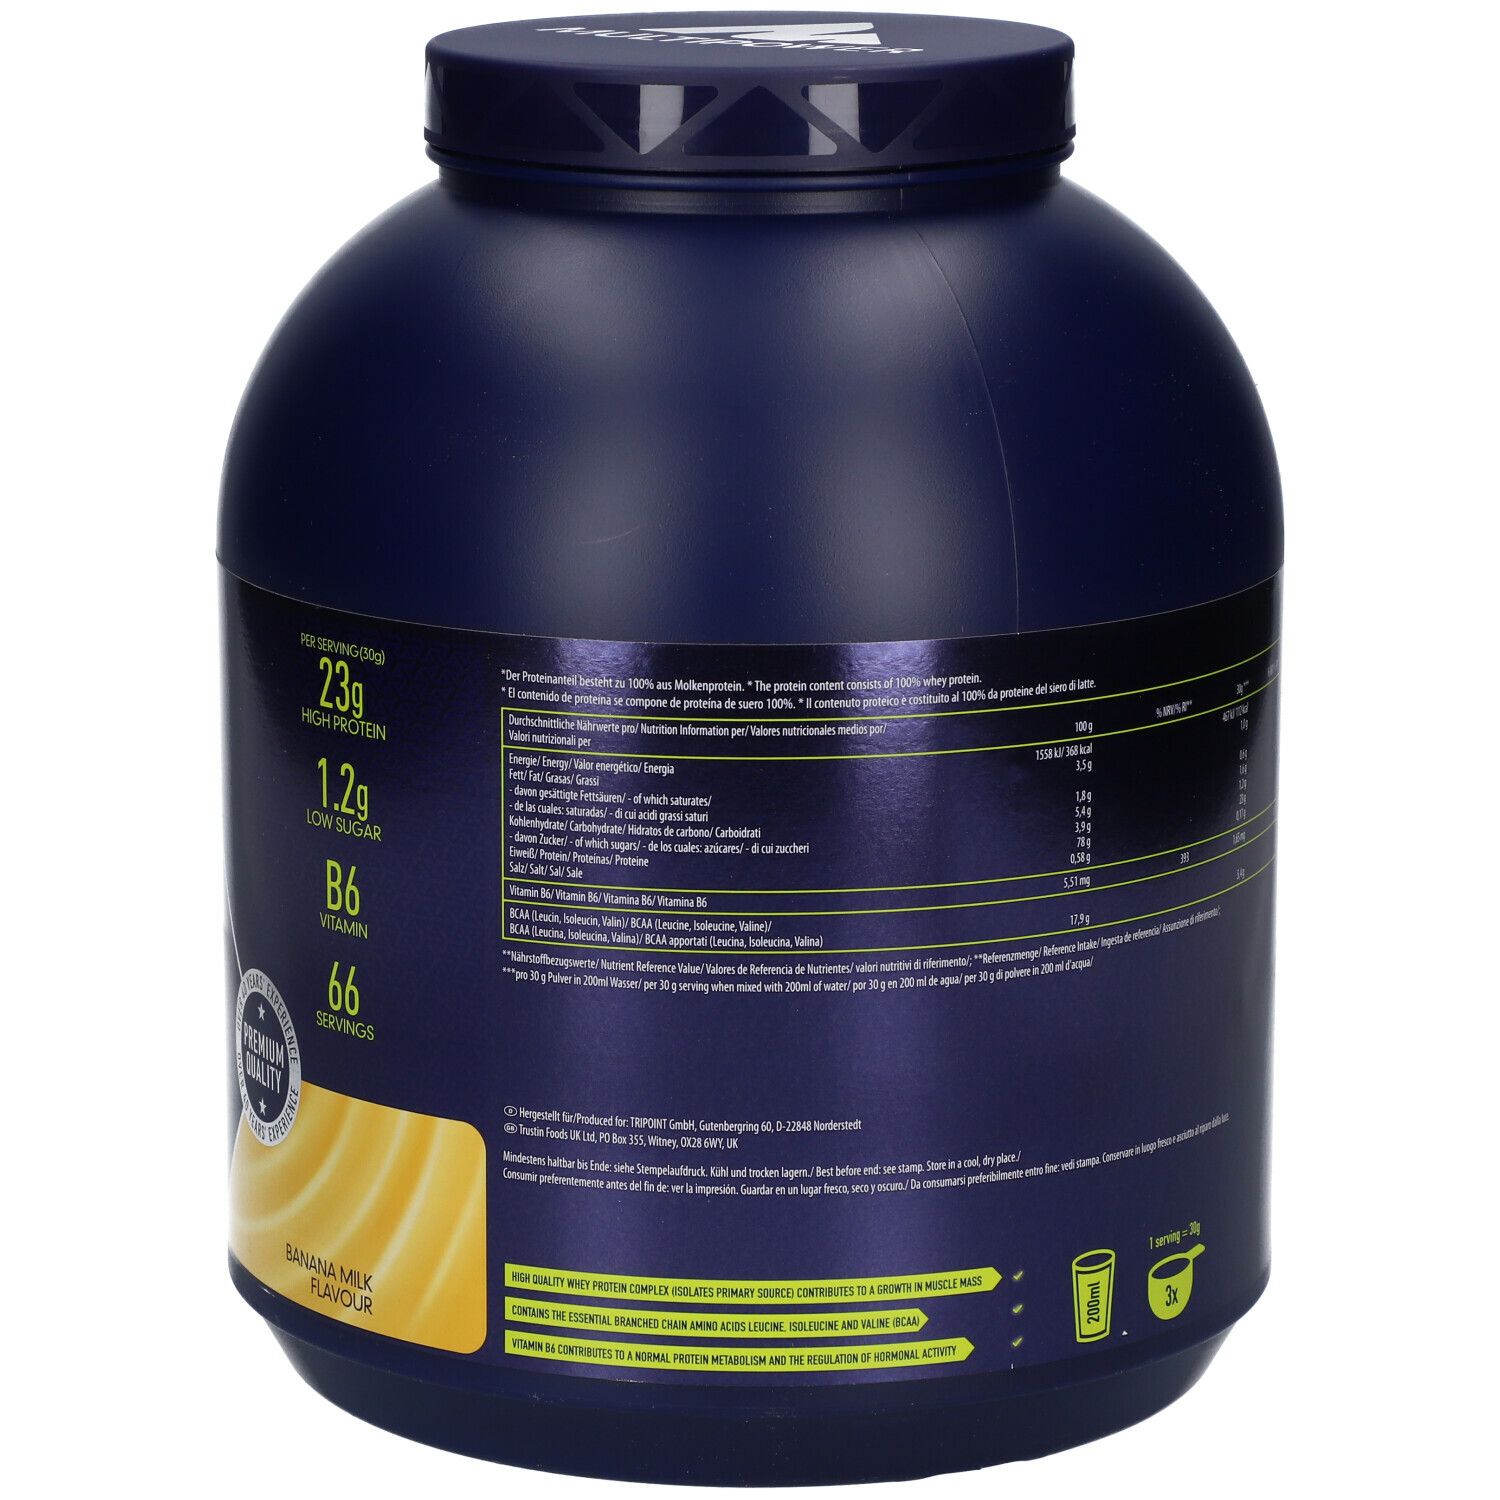 MULTIPOWER 100% PURE WHEY PROTEIN